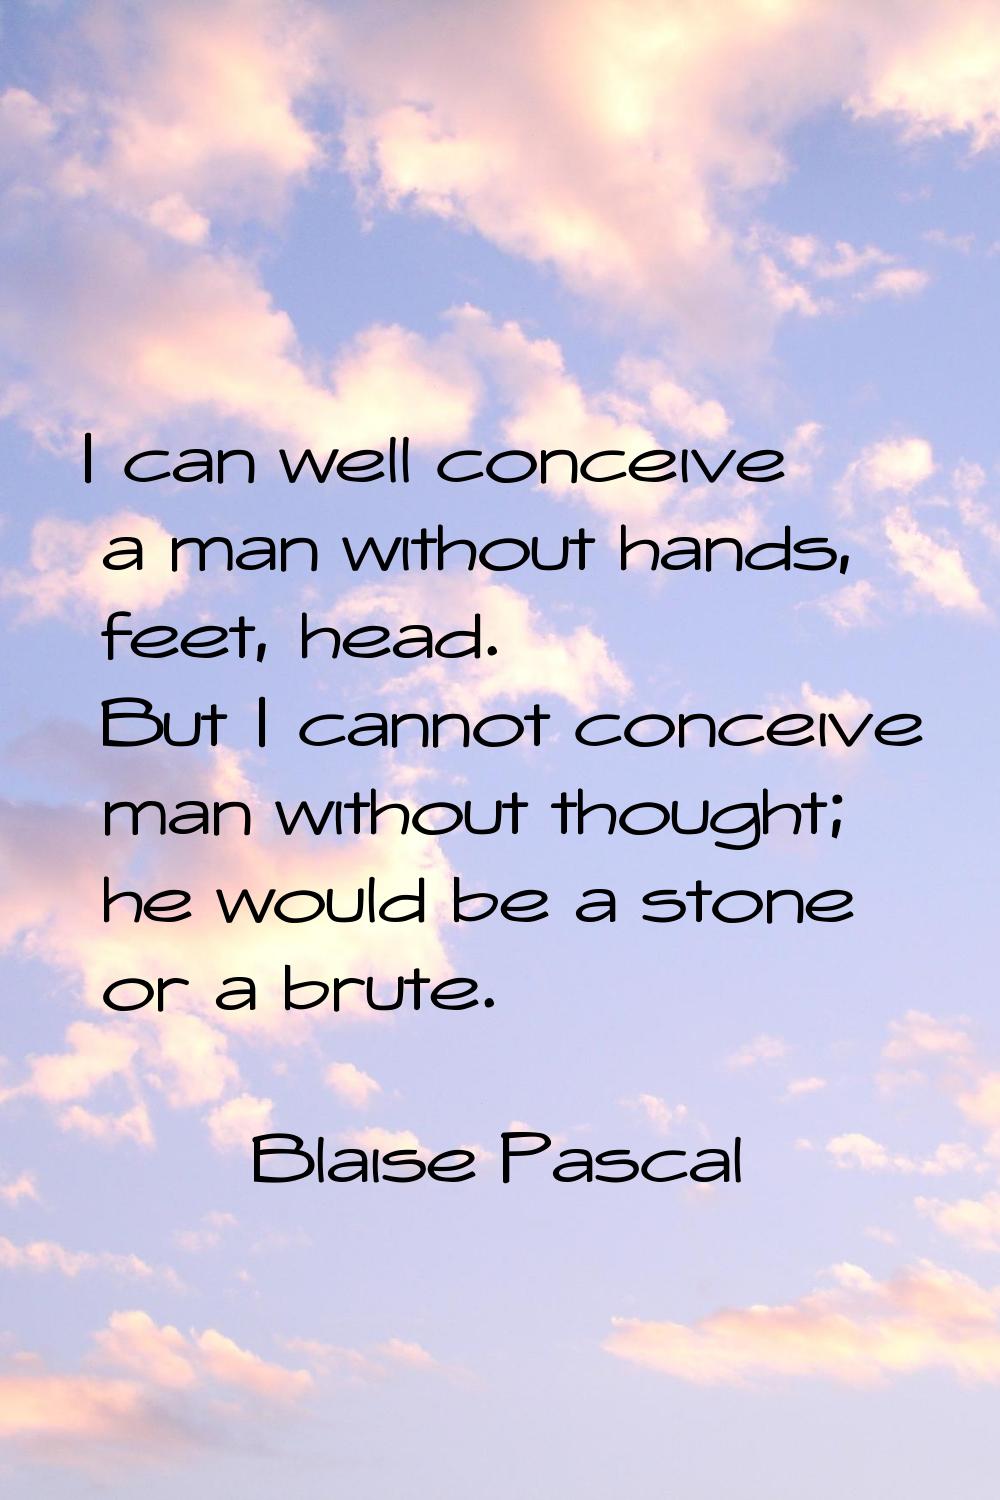 I can well conceive a man without hands, feet, head. But I cannot conceive man without thought; he 